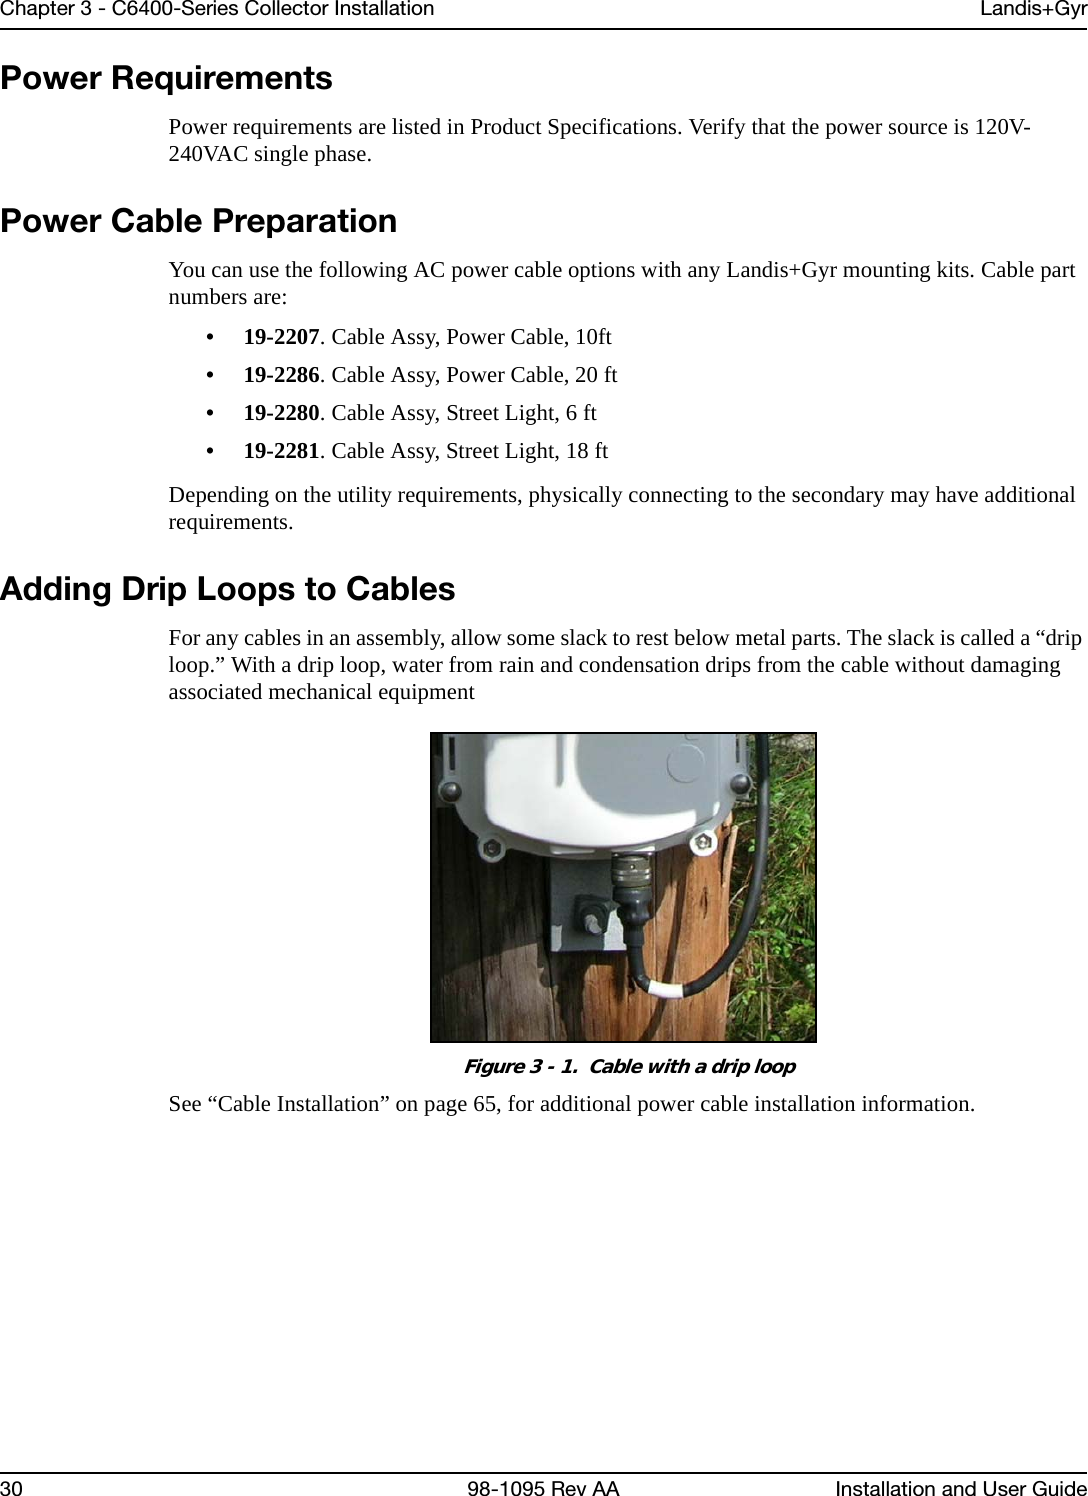 Chapter 3 - C6400-Series Collector Installation Landis+Gyr30 98-1095 Rev AA Installation and User GuidePower RequirementsPower requirements are listed in Product Specifications. Verify that the power source is 120V-240VAC single phase.Power Cable PreparationYou can use the following AC power cable options with any Landis+Gyr mounting kits. Cable part numbers are: • 19-2207. Cable Assy, Power Cable, 10ft• 19-2286. Cable Assy, Power Cable, 20 ft• 19-2280. Cable Assy, Street Light, 6 ft• 19-2281. Cable Assy, Street Light, 18 ftDepending on the utility requirements, physically connecting to the secondary may have additional requirements. Adding Drip Loops to CablesFor any cables in an assembly, allow some slack to rest below metal parts. The slack is called a “drip loop.” With a drip loop, water from rain and condensation drips from the cable without damaging associated mechanical equipmentFigure 3 - 1.  Cable with a drip loopSee “Cable Installation” on page 65, for additional power cable installation information.